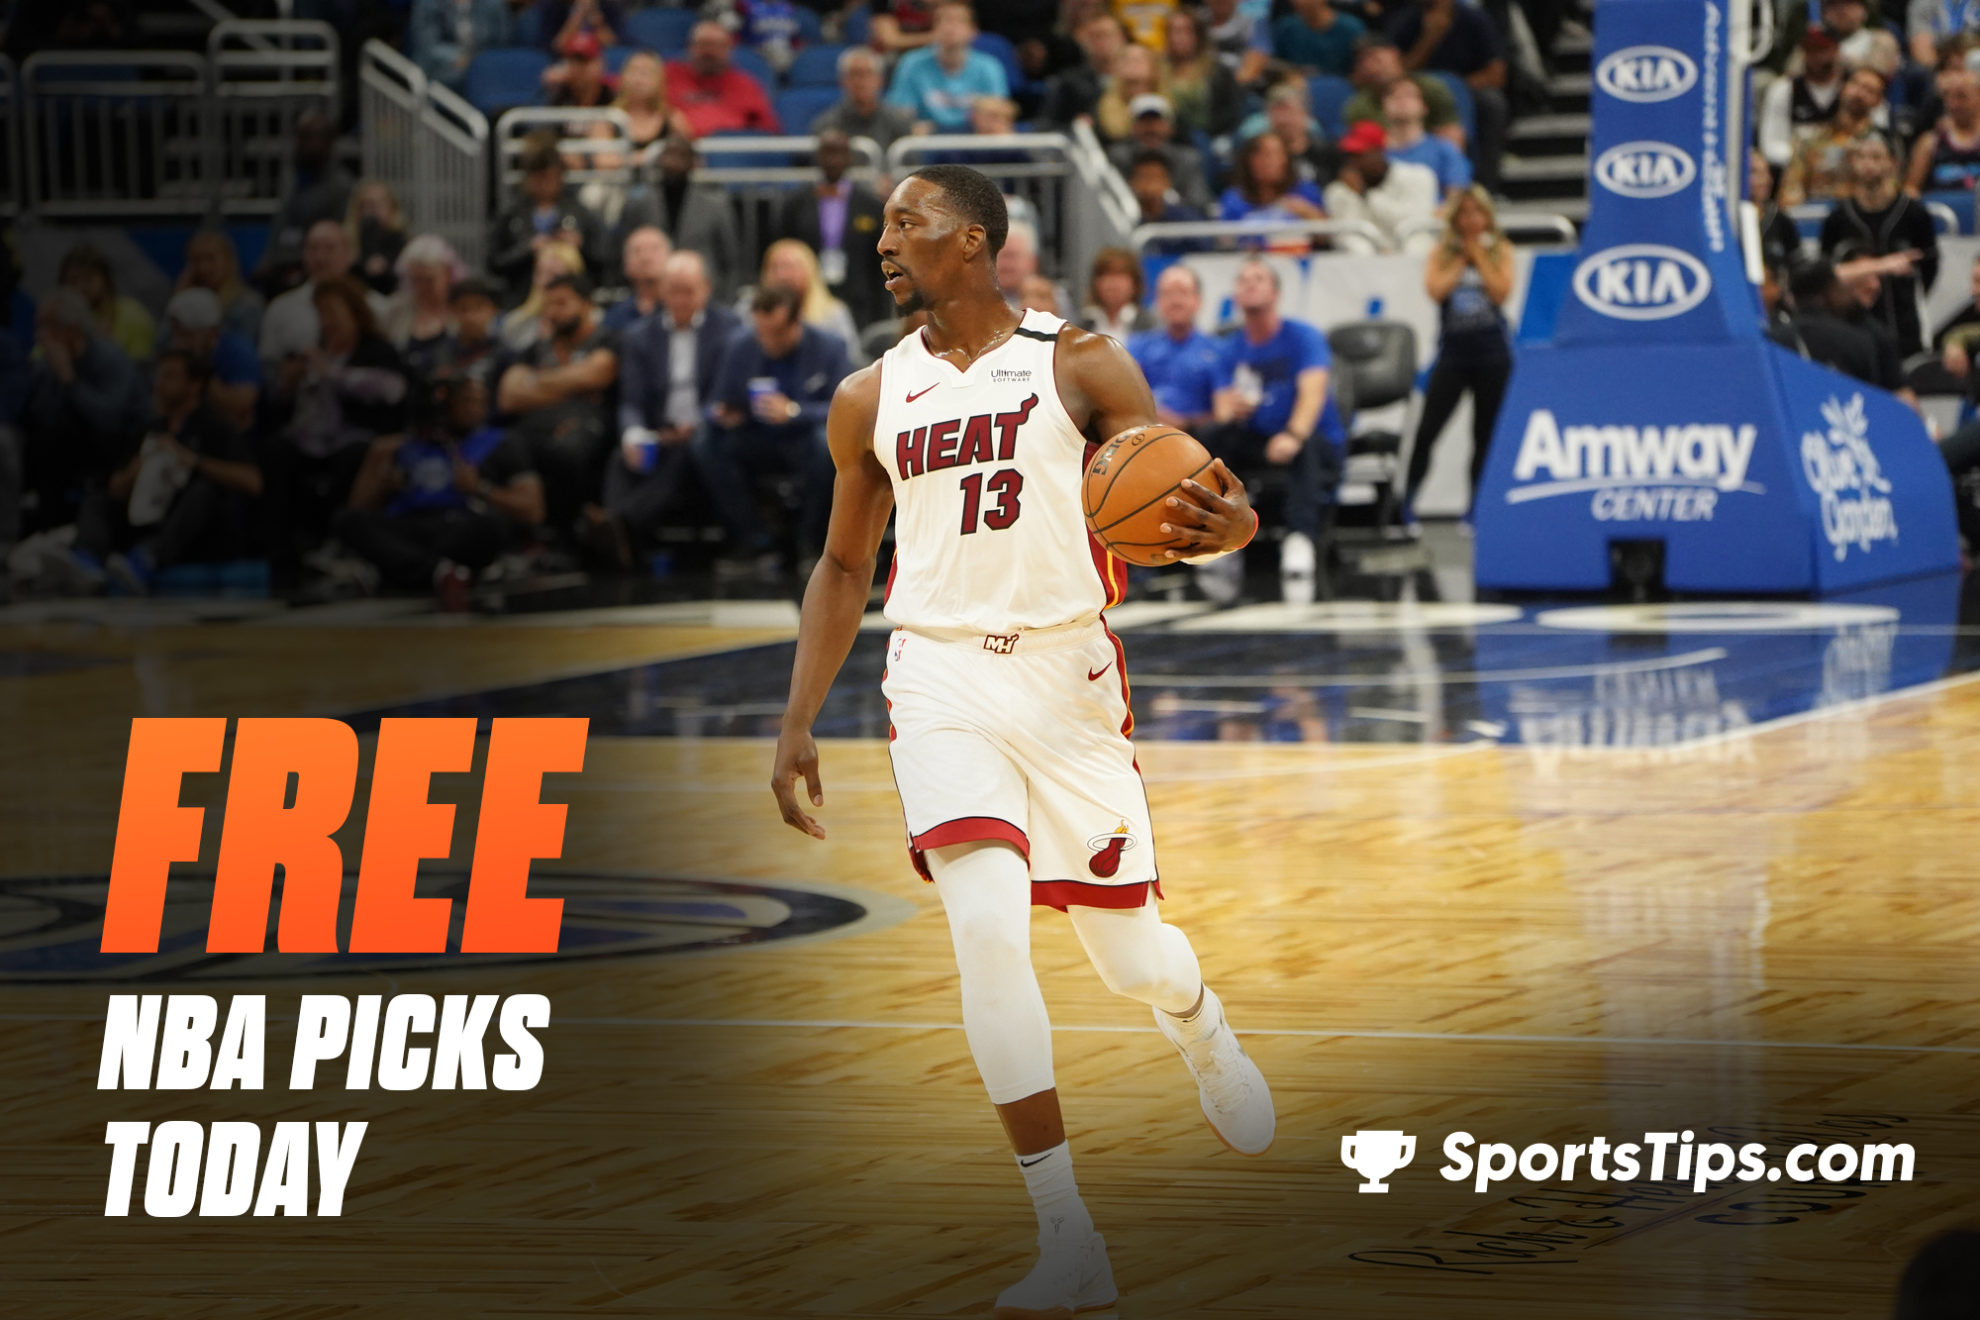 Free NBA Picks Today for Monday, March 21st, 2022